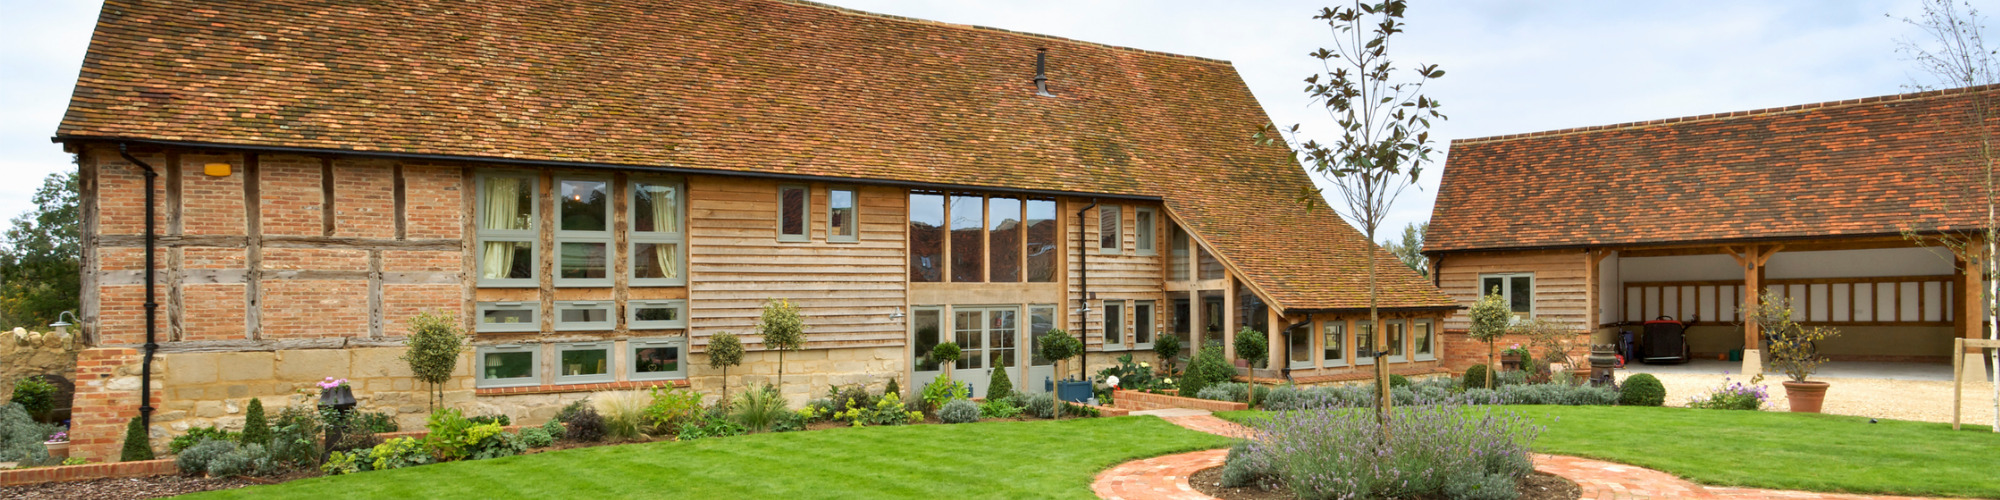 Barn Conversions - Opportunities & Risks for Conveyancers